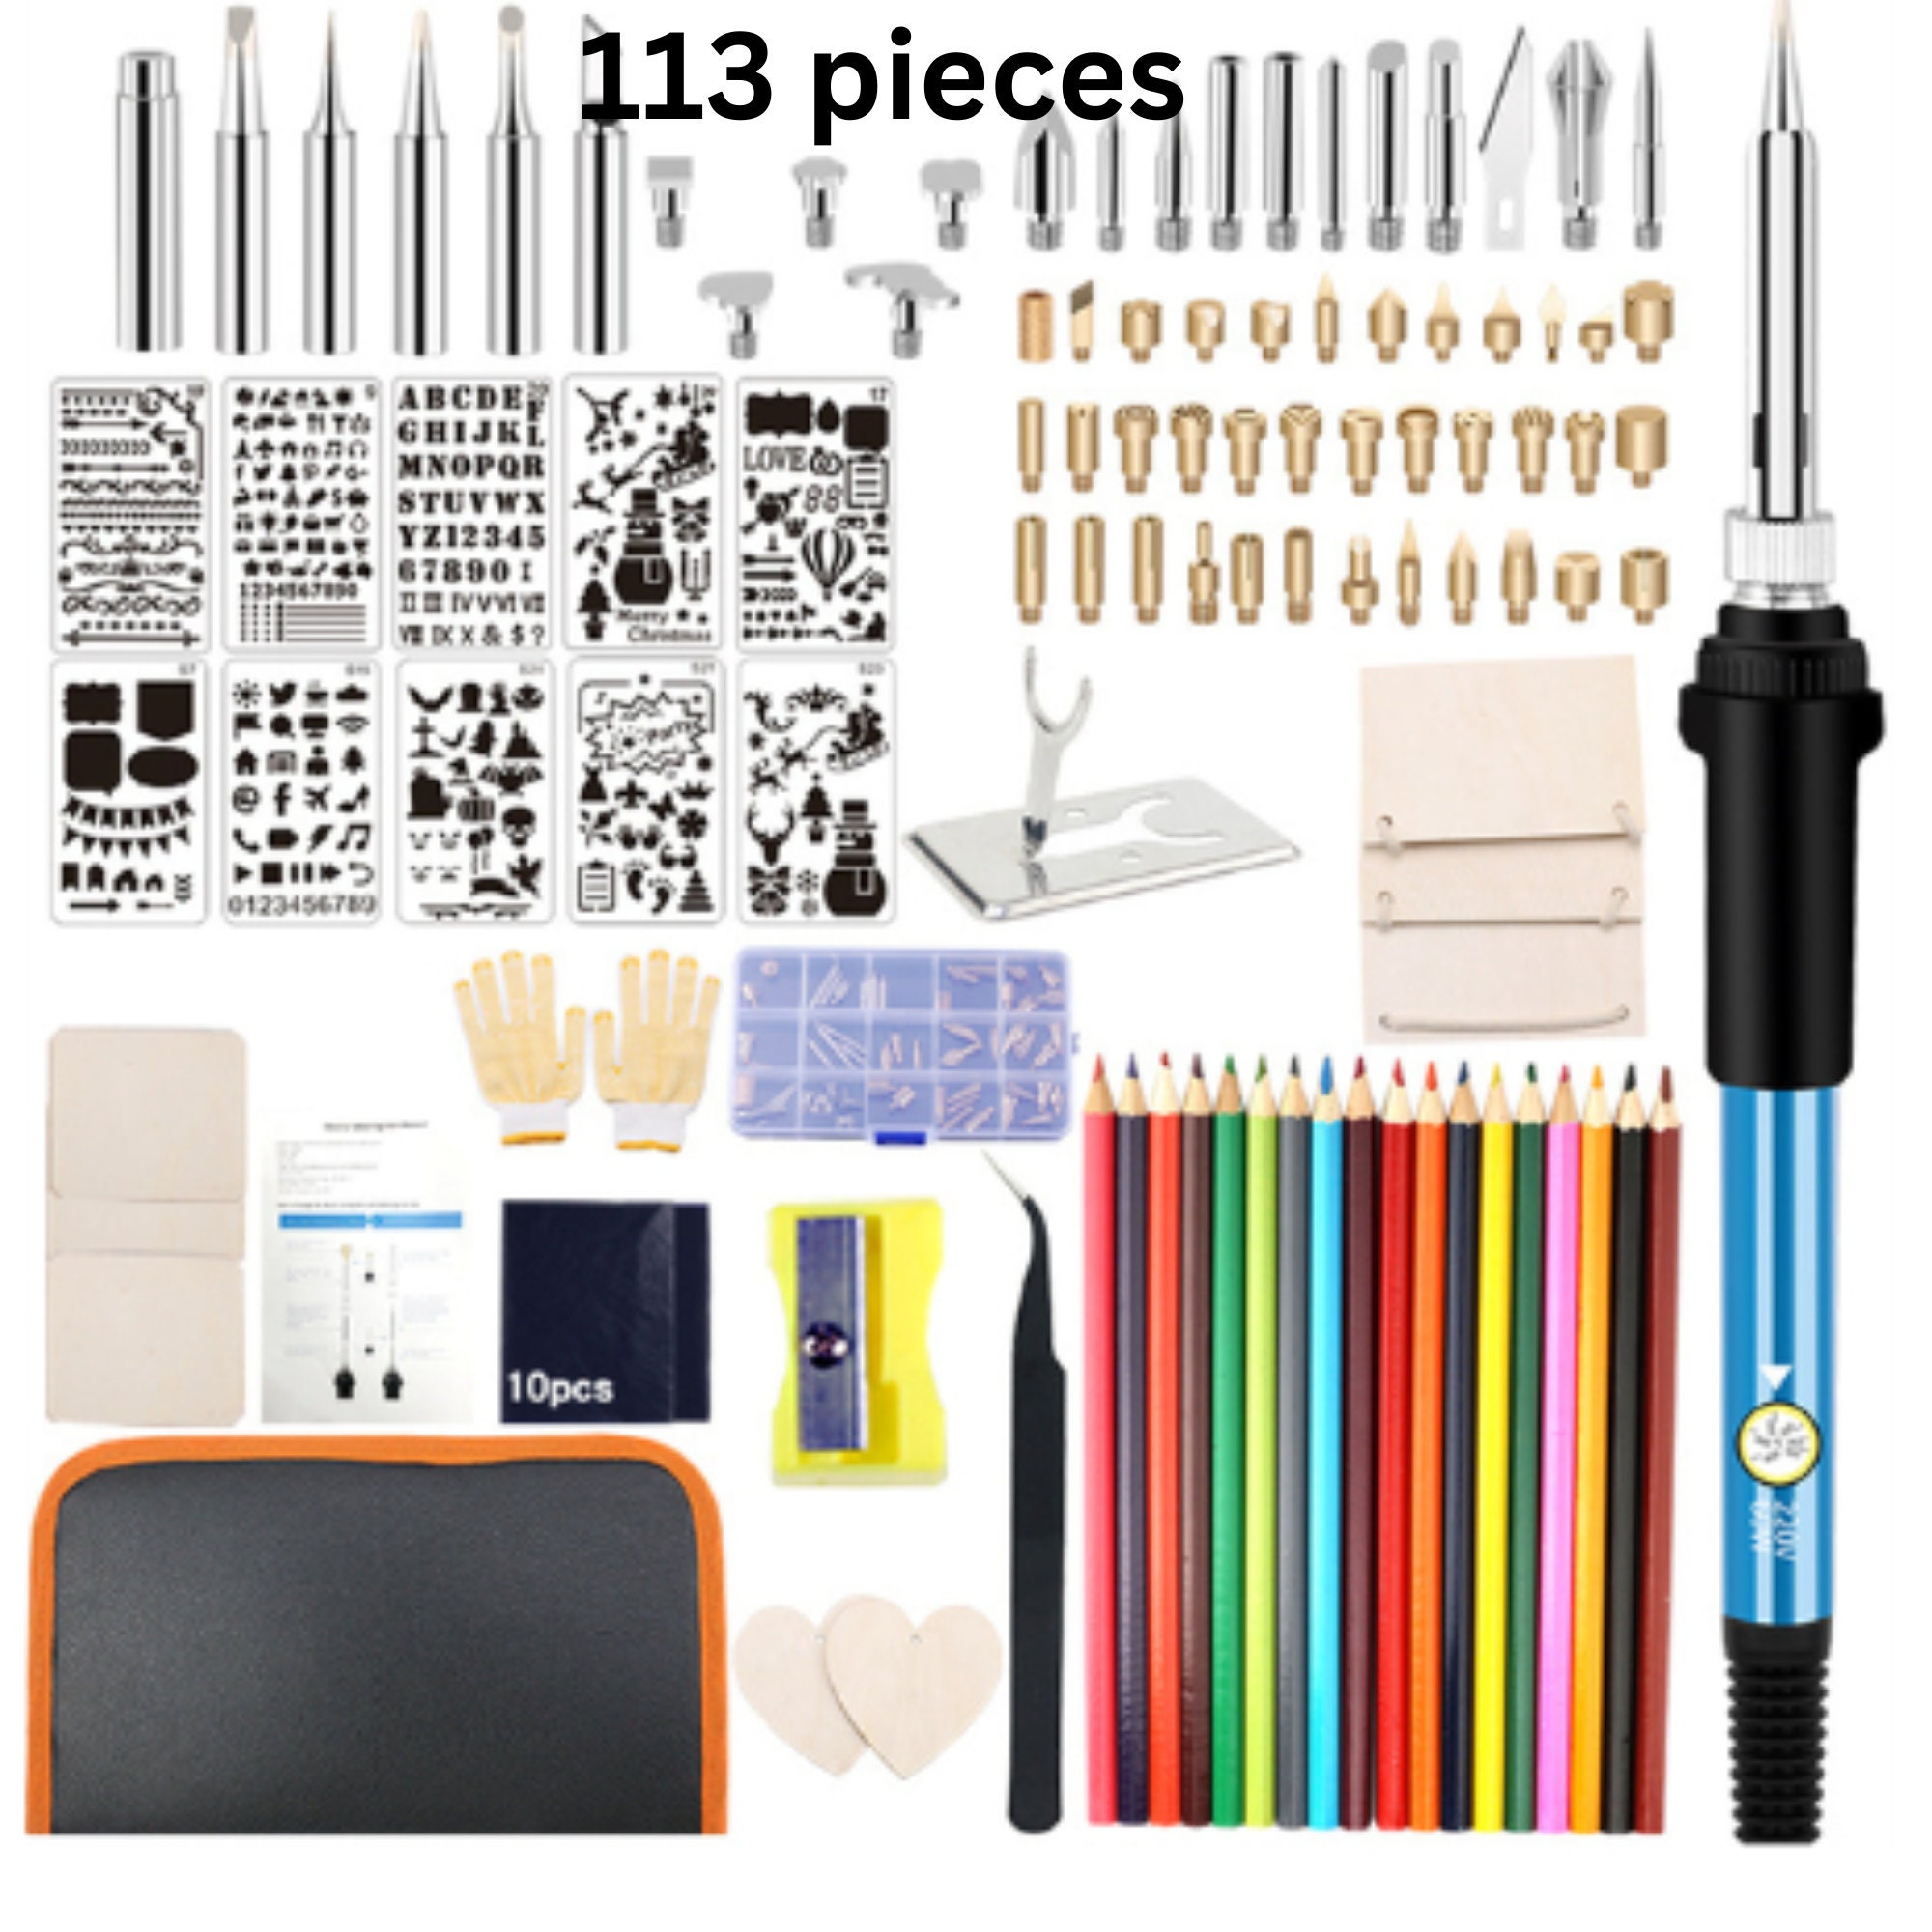 Tooltreaux 56pc Complete Wood Burning Pen Kit With Assorted Tips